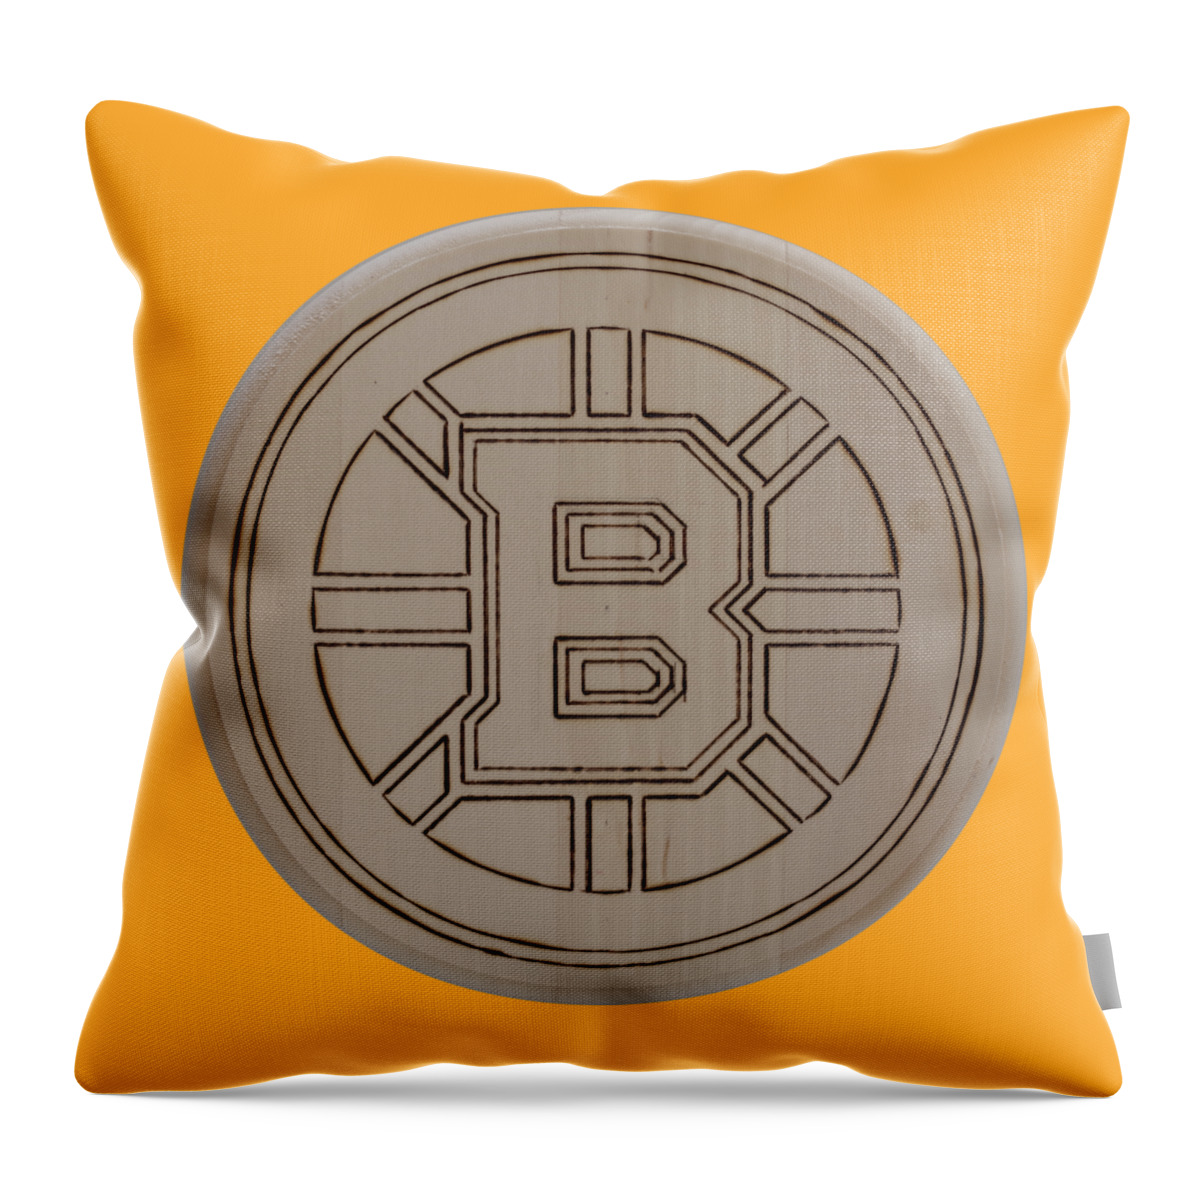 Pyrography Throw Pillow featuring the pyrography Boston Bruins est 1924 - Original Six by Sean Connolly